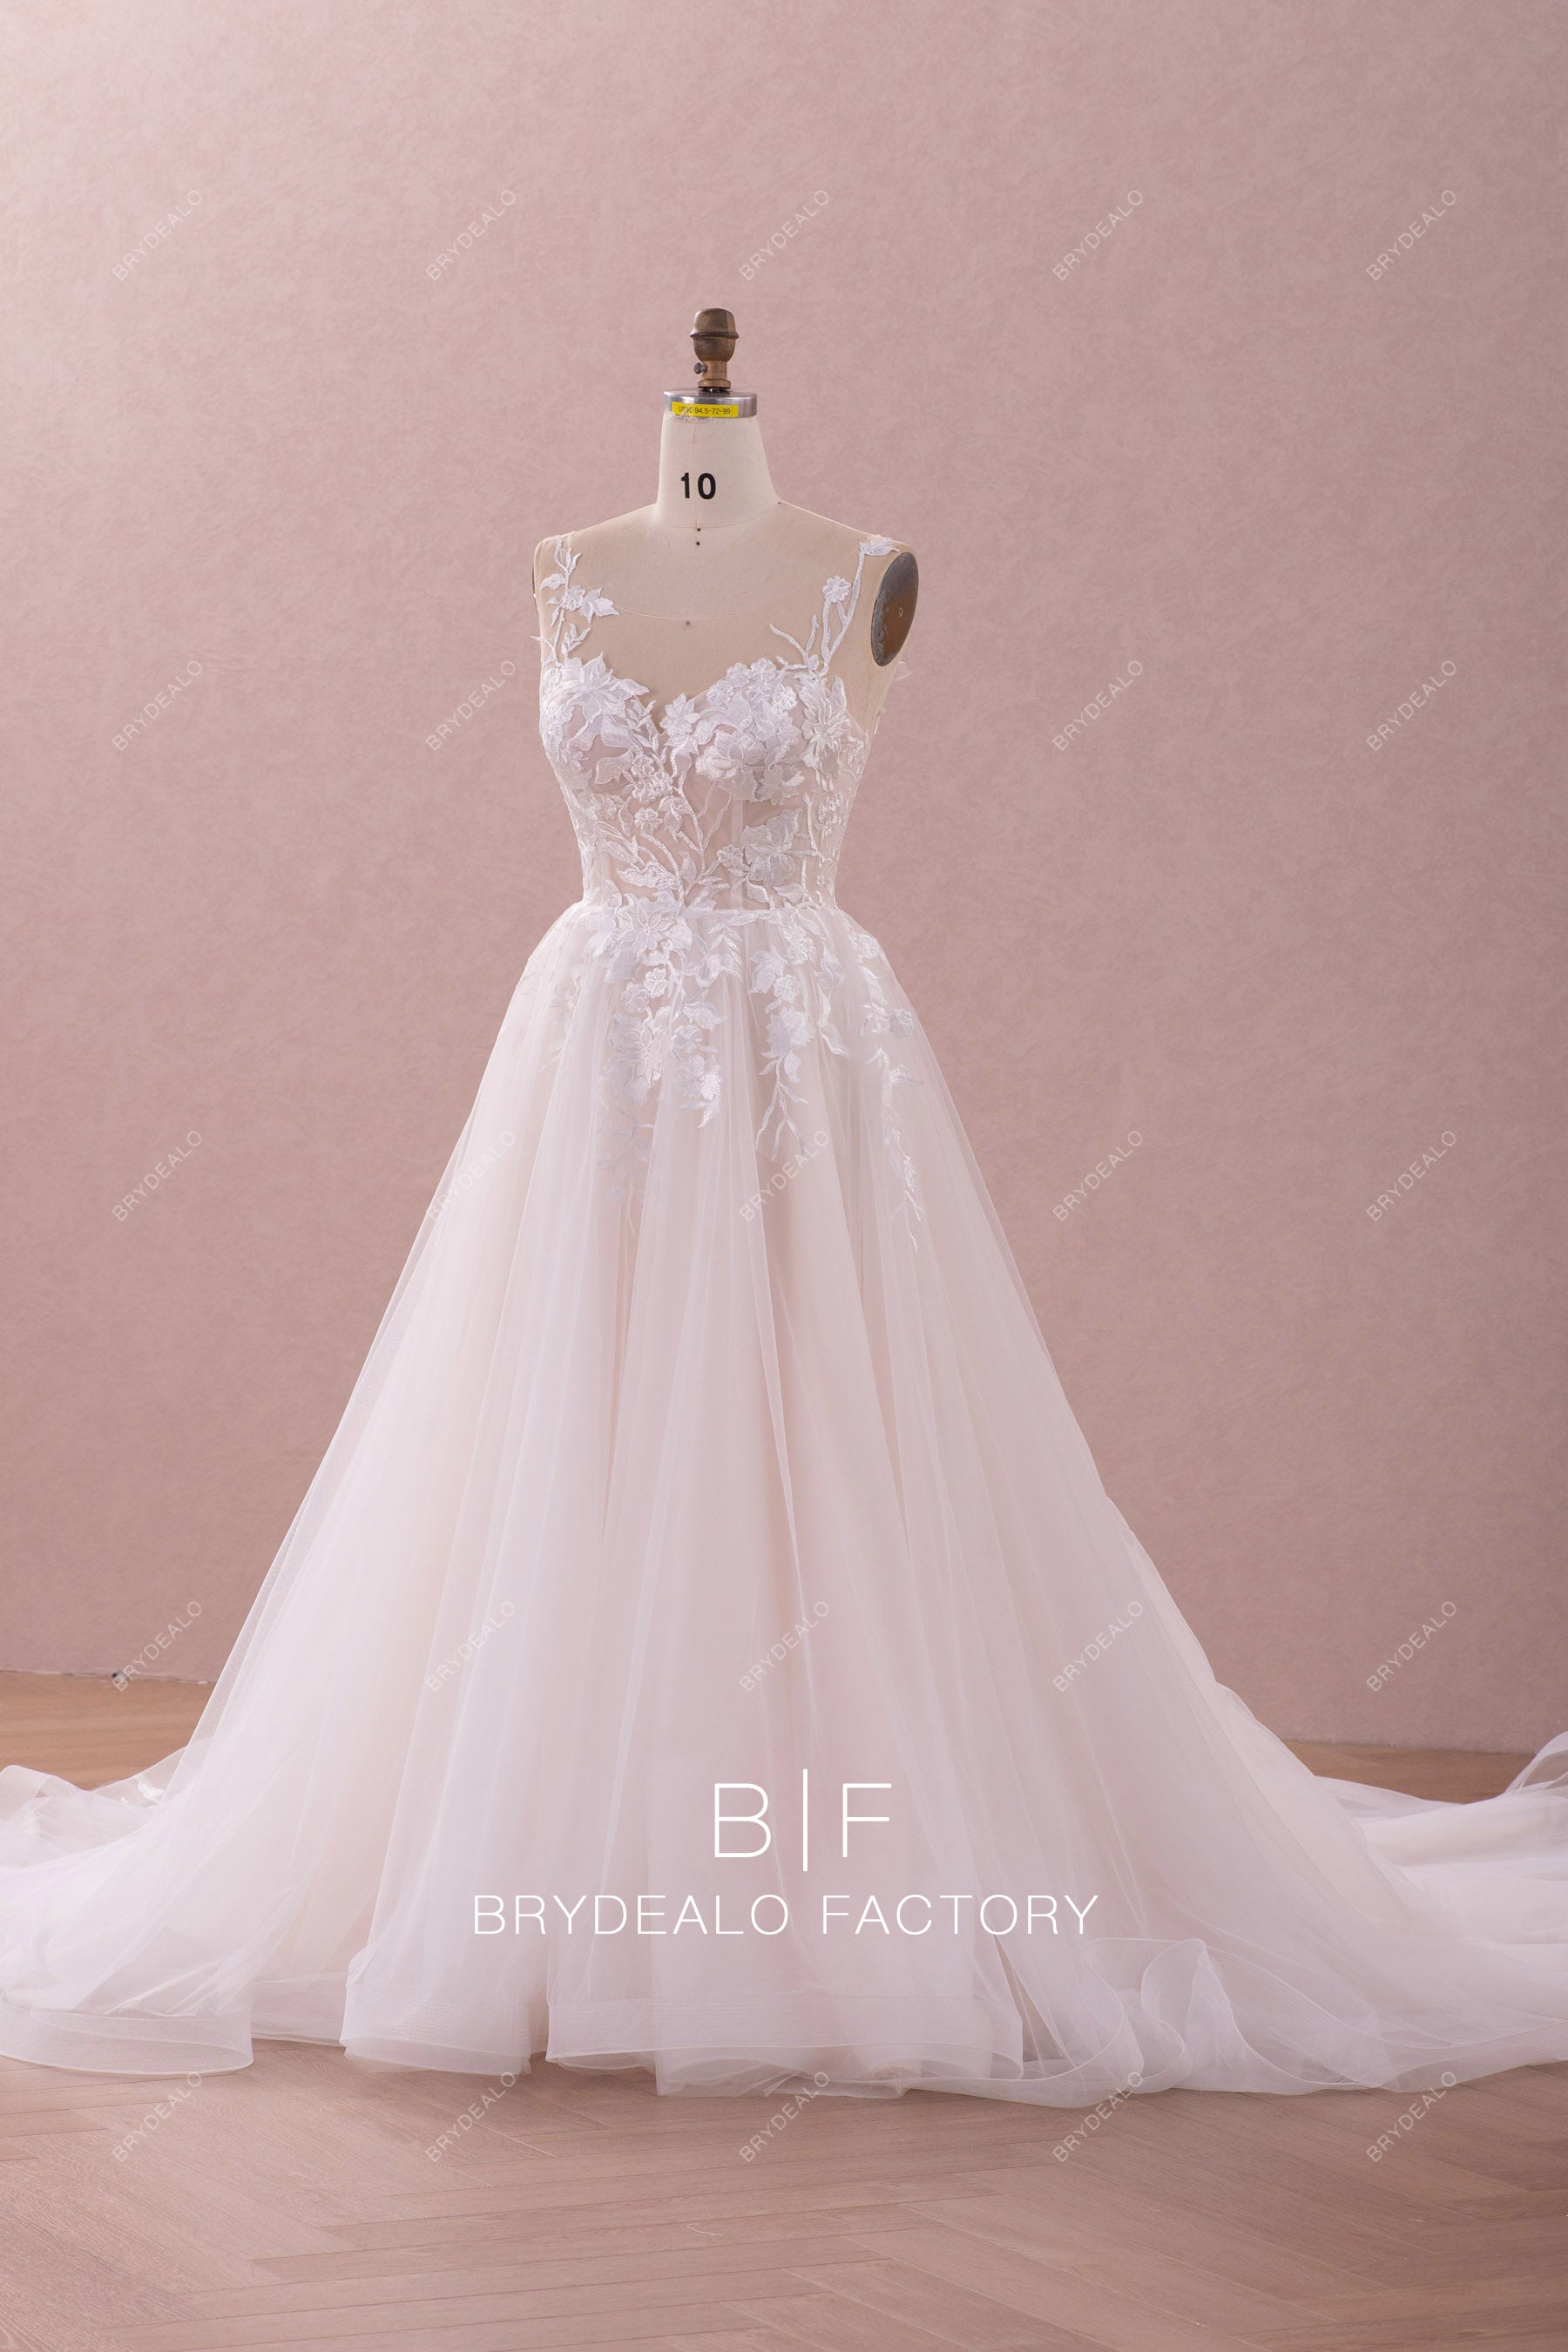 ruffled skirt lace tulle wedding gown